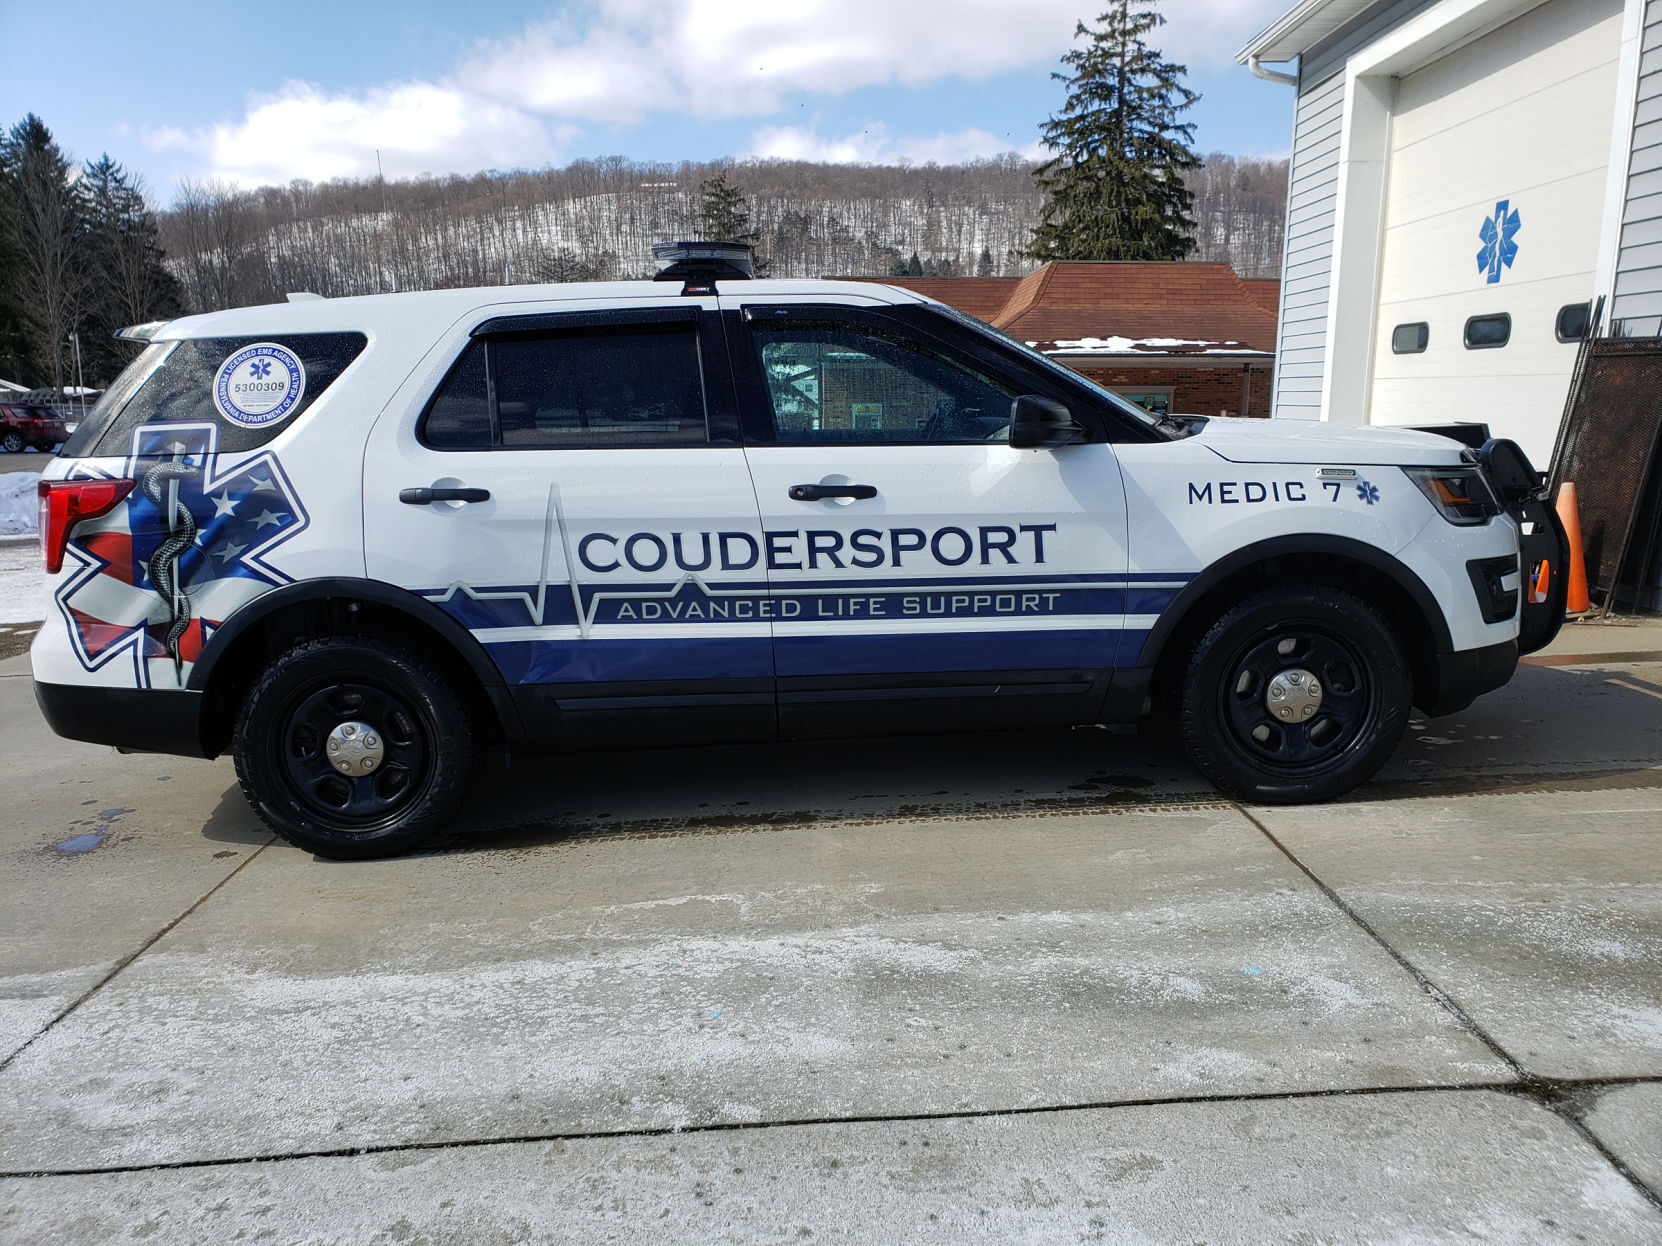 Coudersport ambulance sounds the alarm due to lack of funds Local tiogapublishing